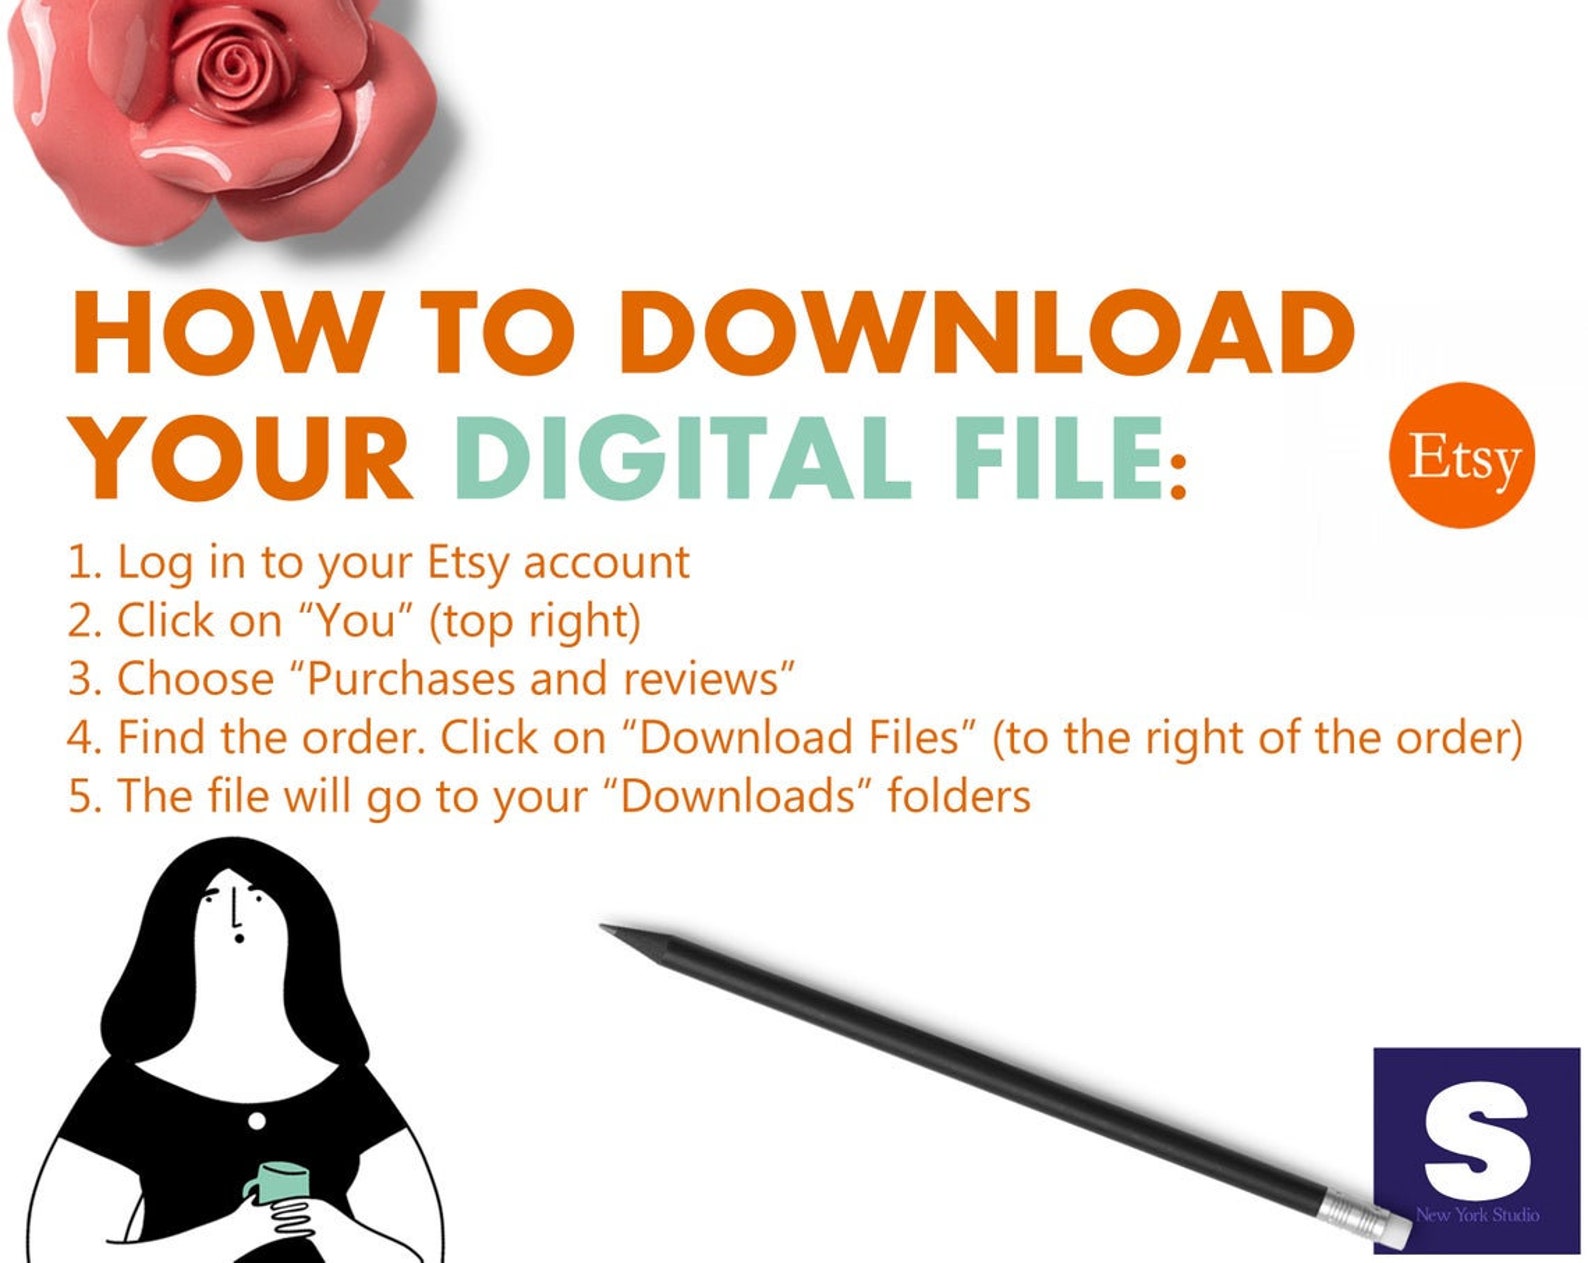 How to download your digital file.